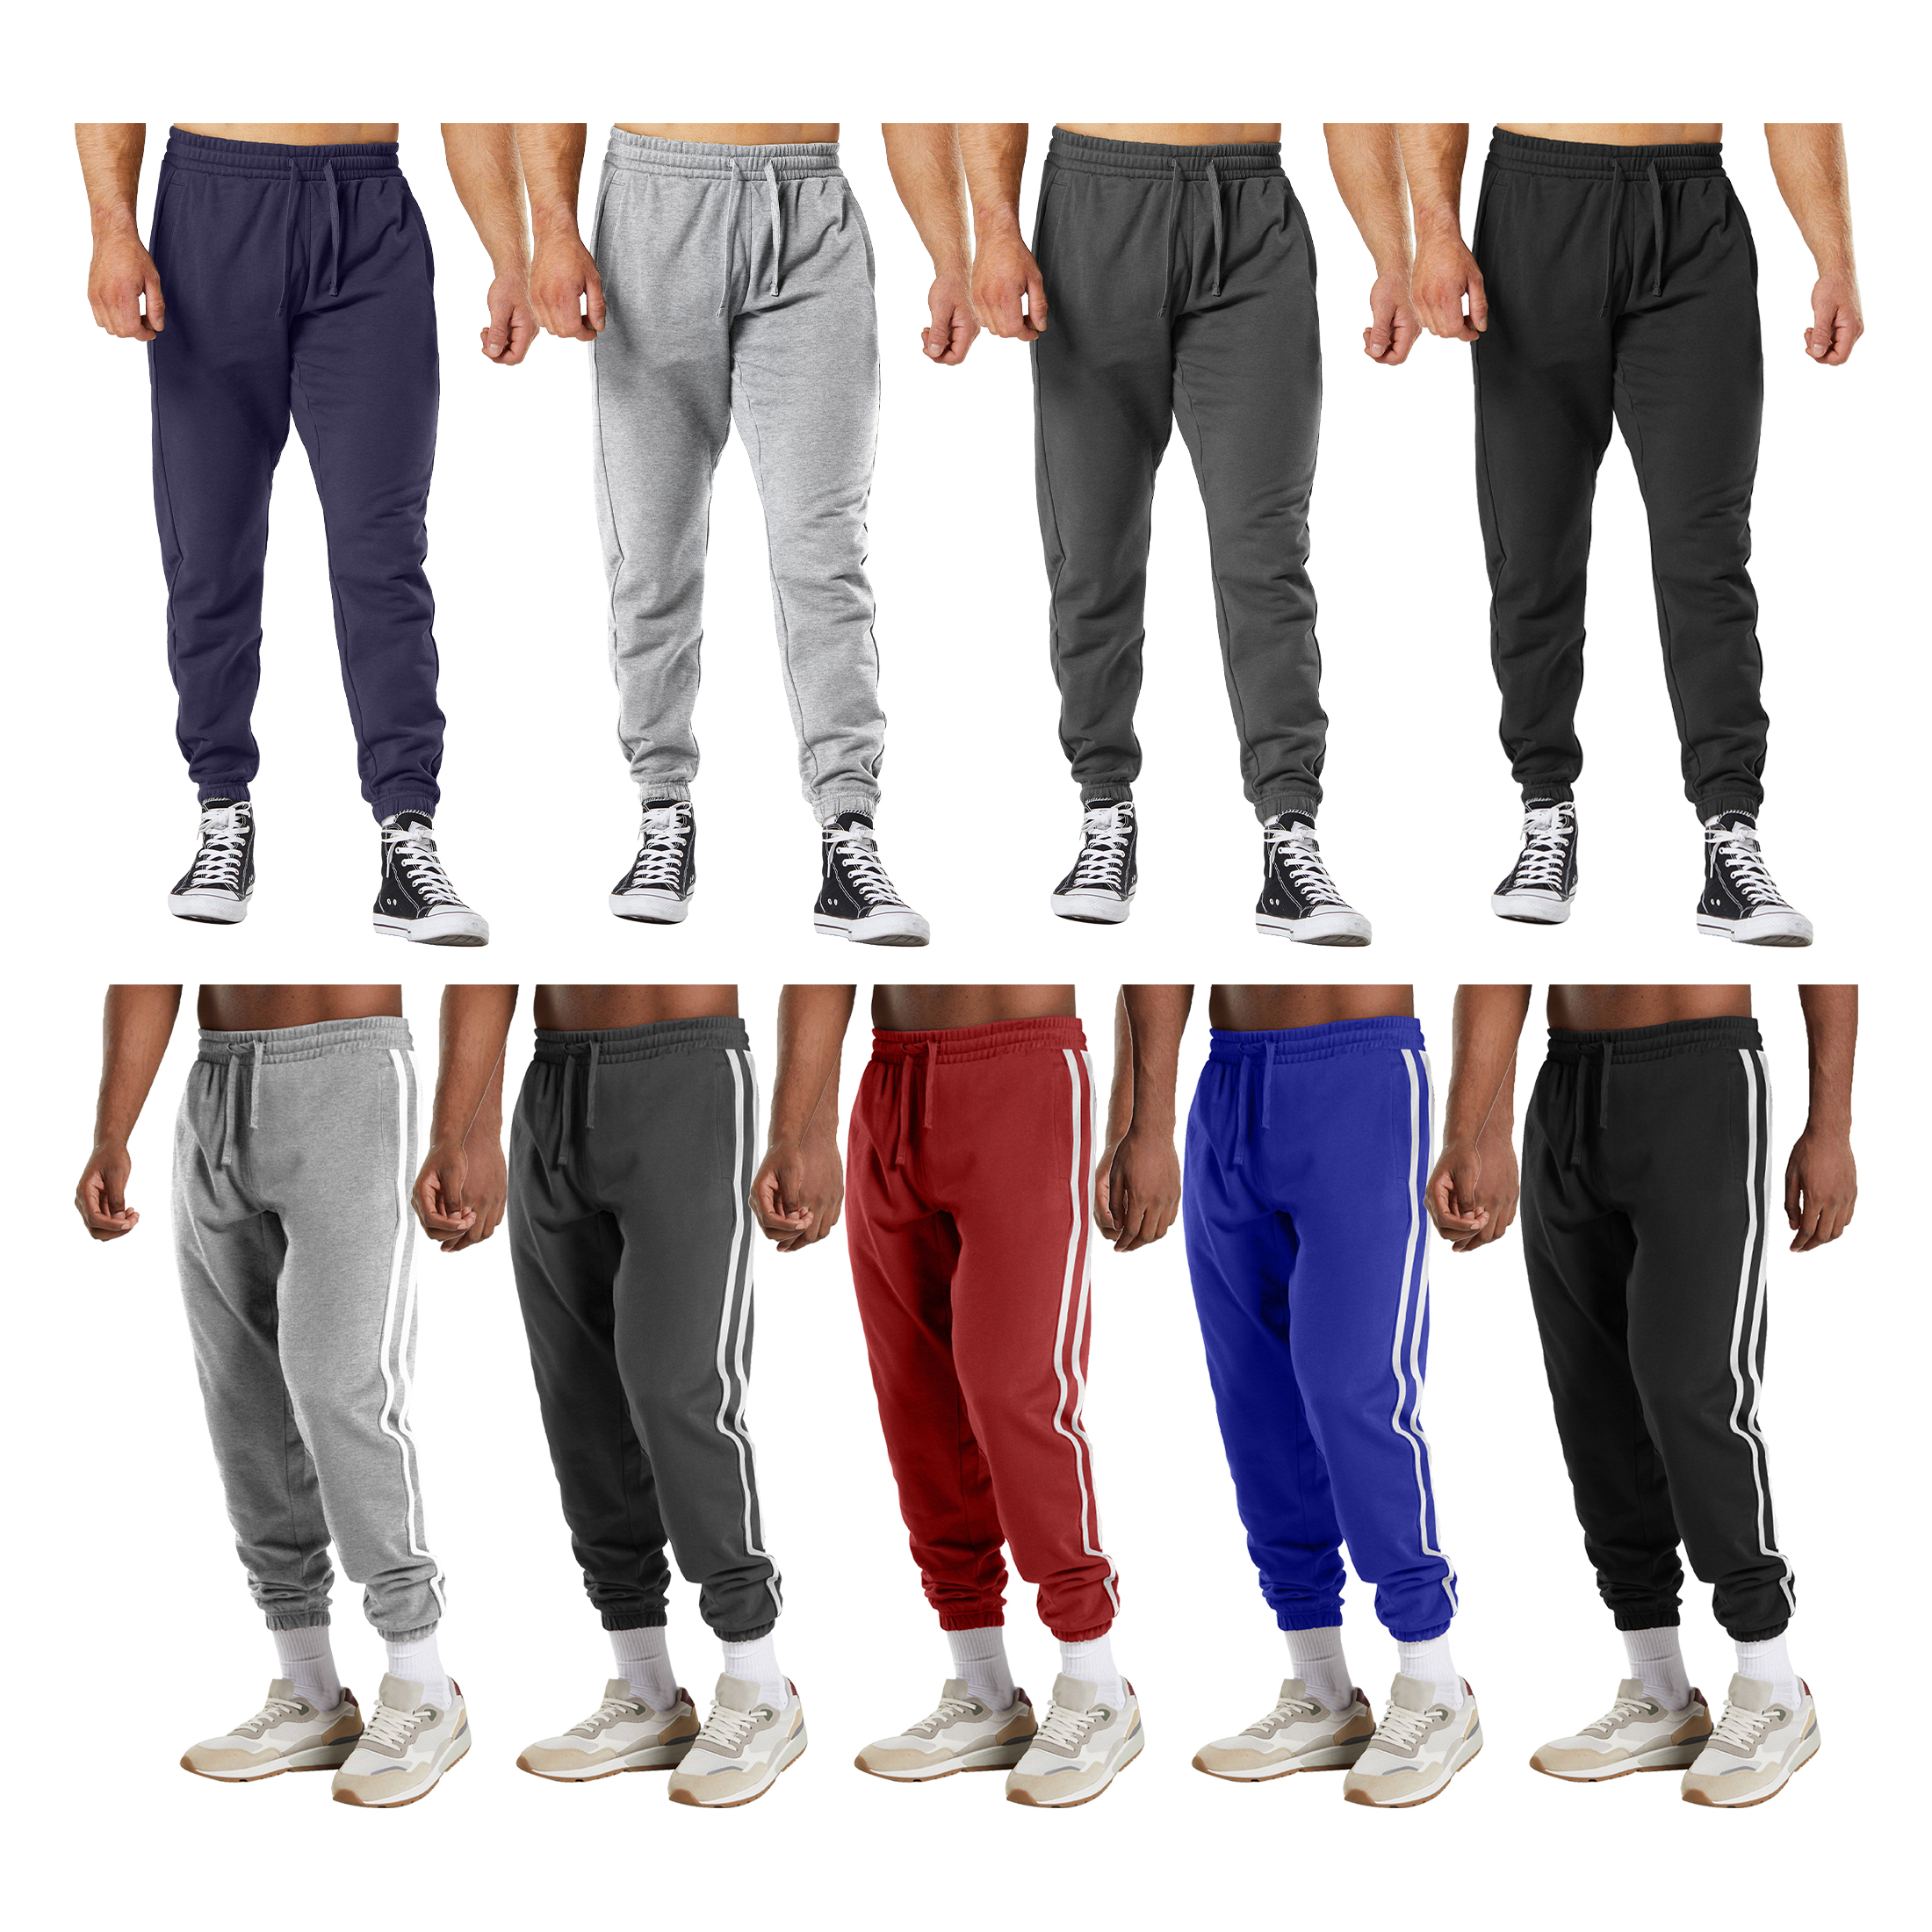 Multi-Pack: Men's Casual Fleece-Lined Elastic Bottom Jogger Pants With Pockets - 1-PACK, M